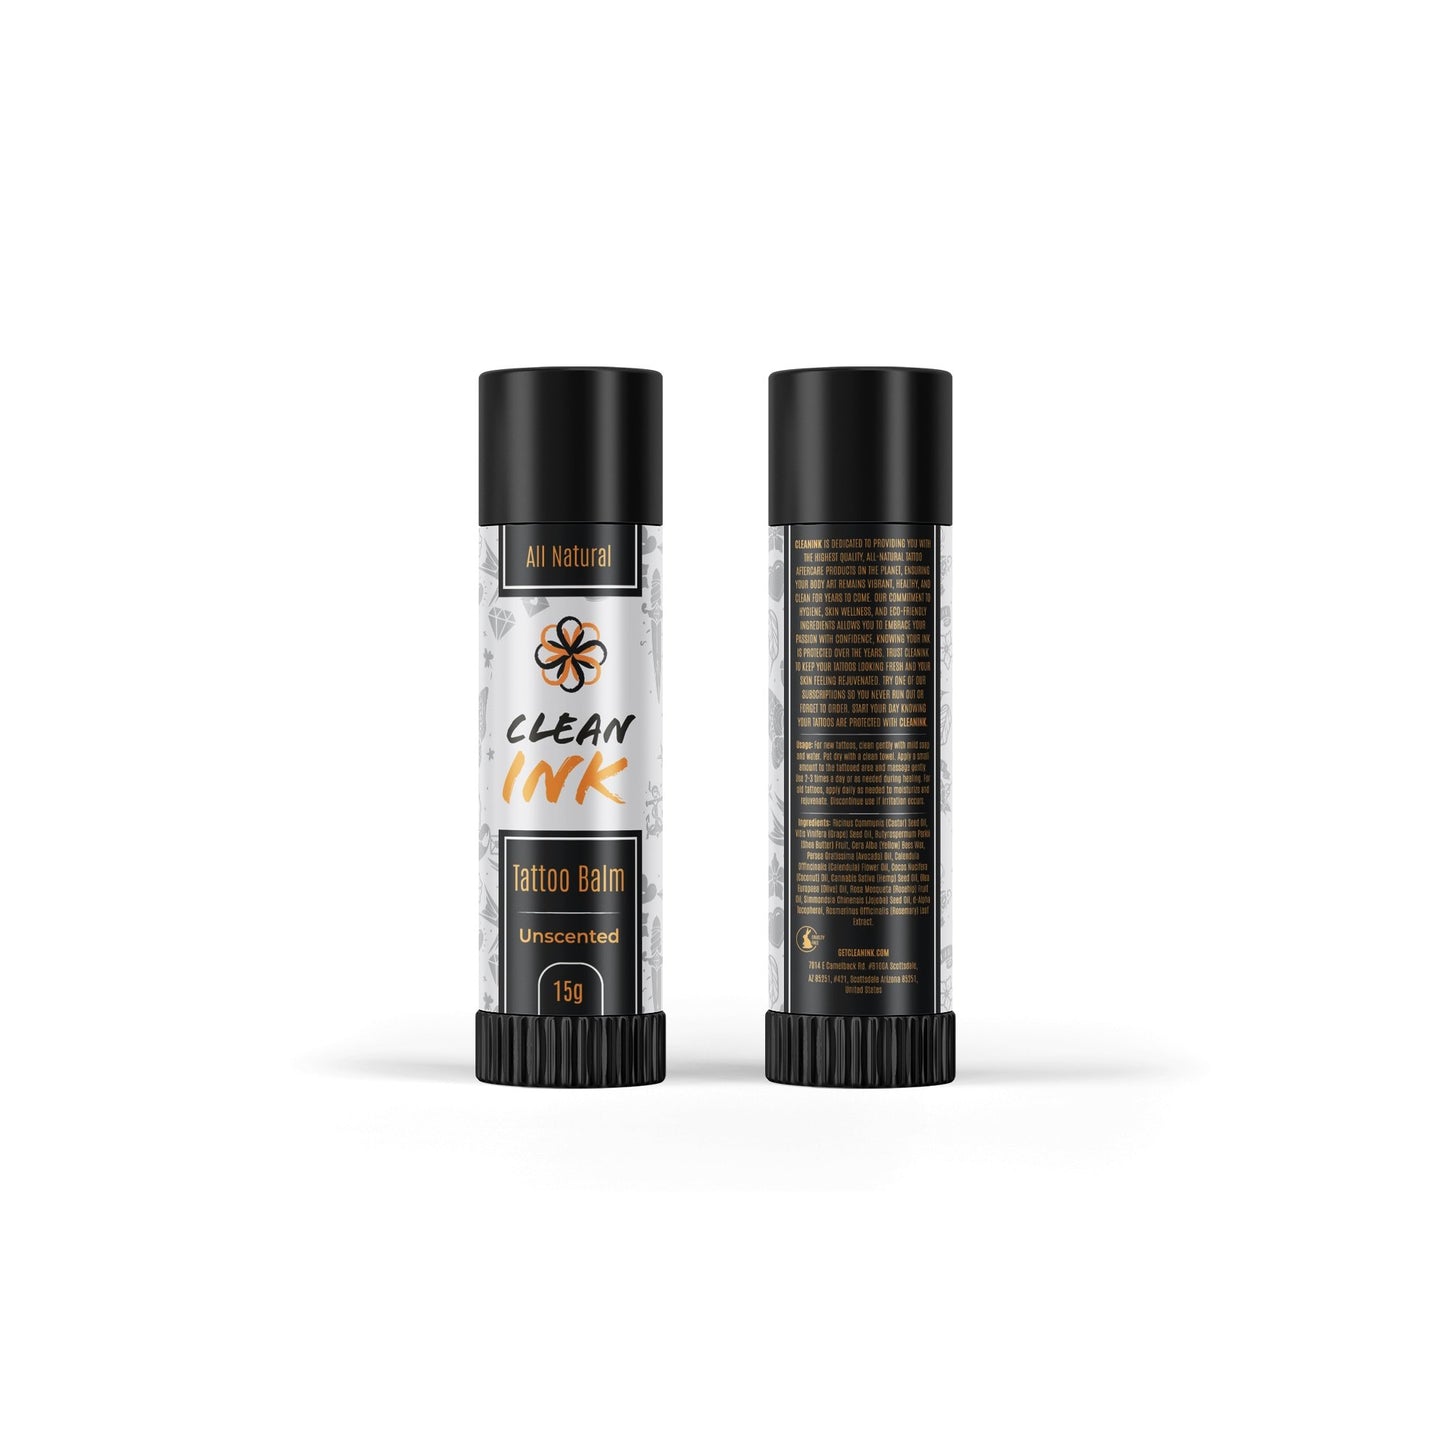 Clean Ink Tattoo Balm Tube Subscription - Clean Ink